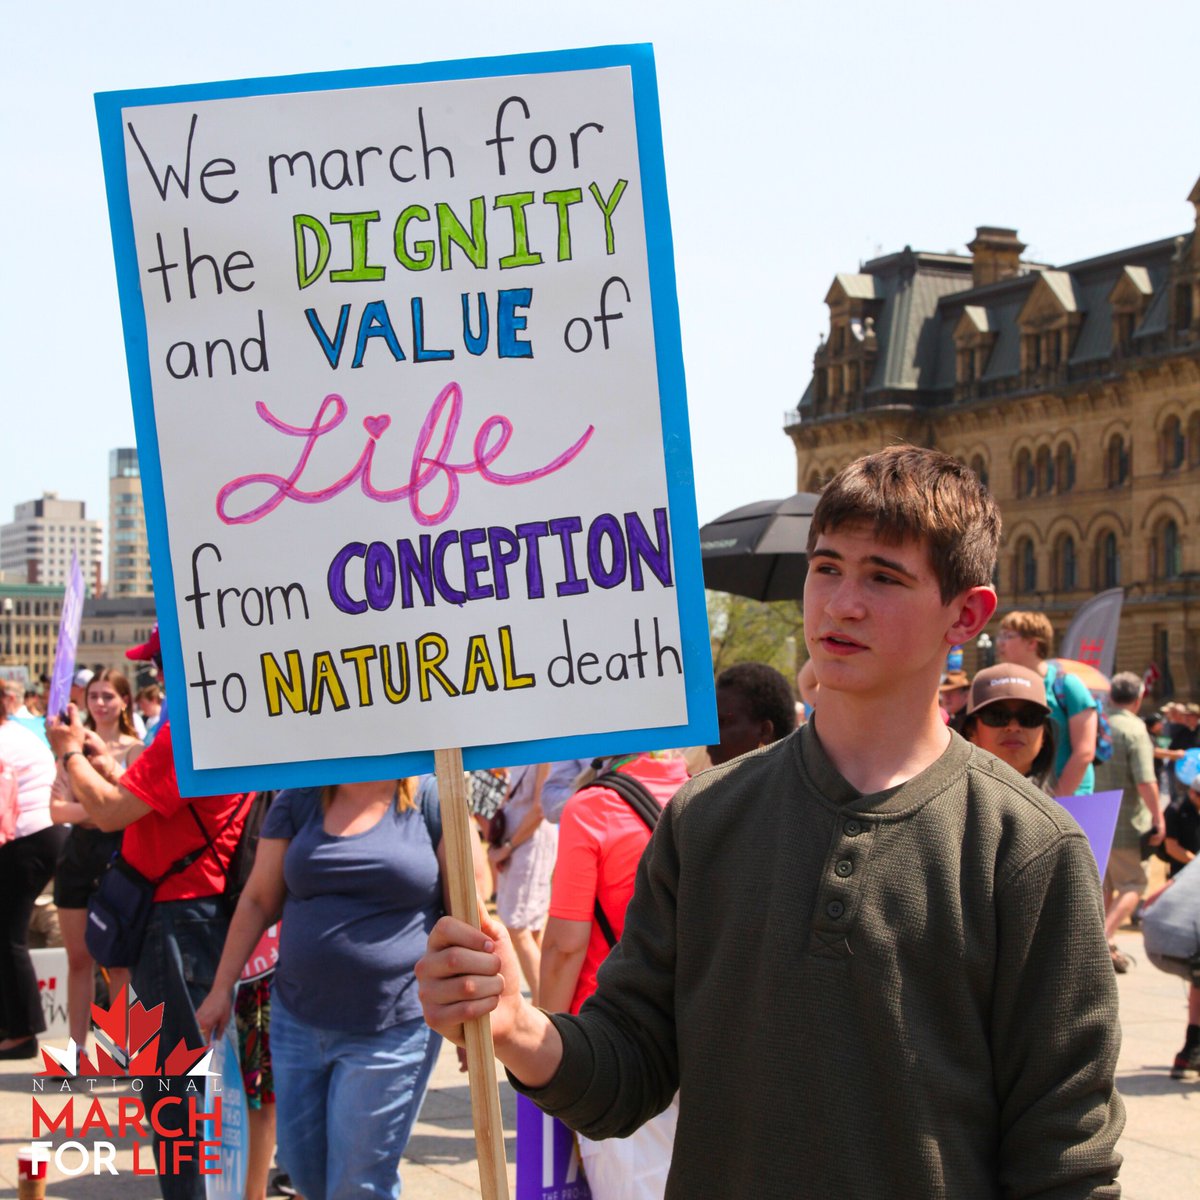 We March for the dignity and value of life from conception to natural death. 

#MarchForLife #WhyWeMarch #ProLife #MarchForLifeCanada